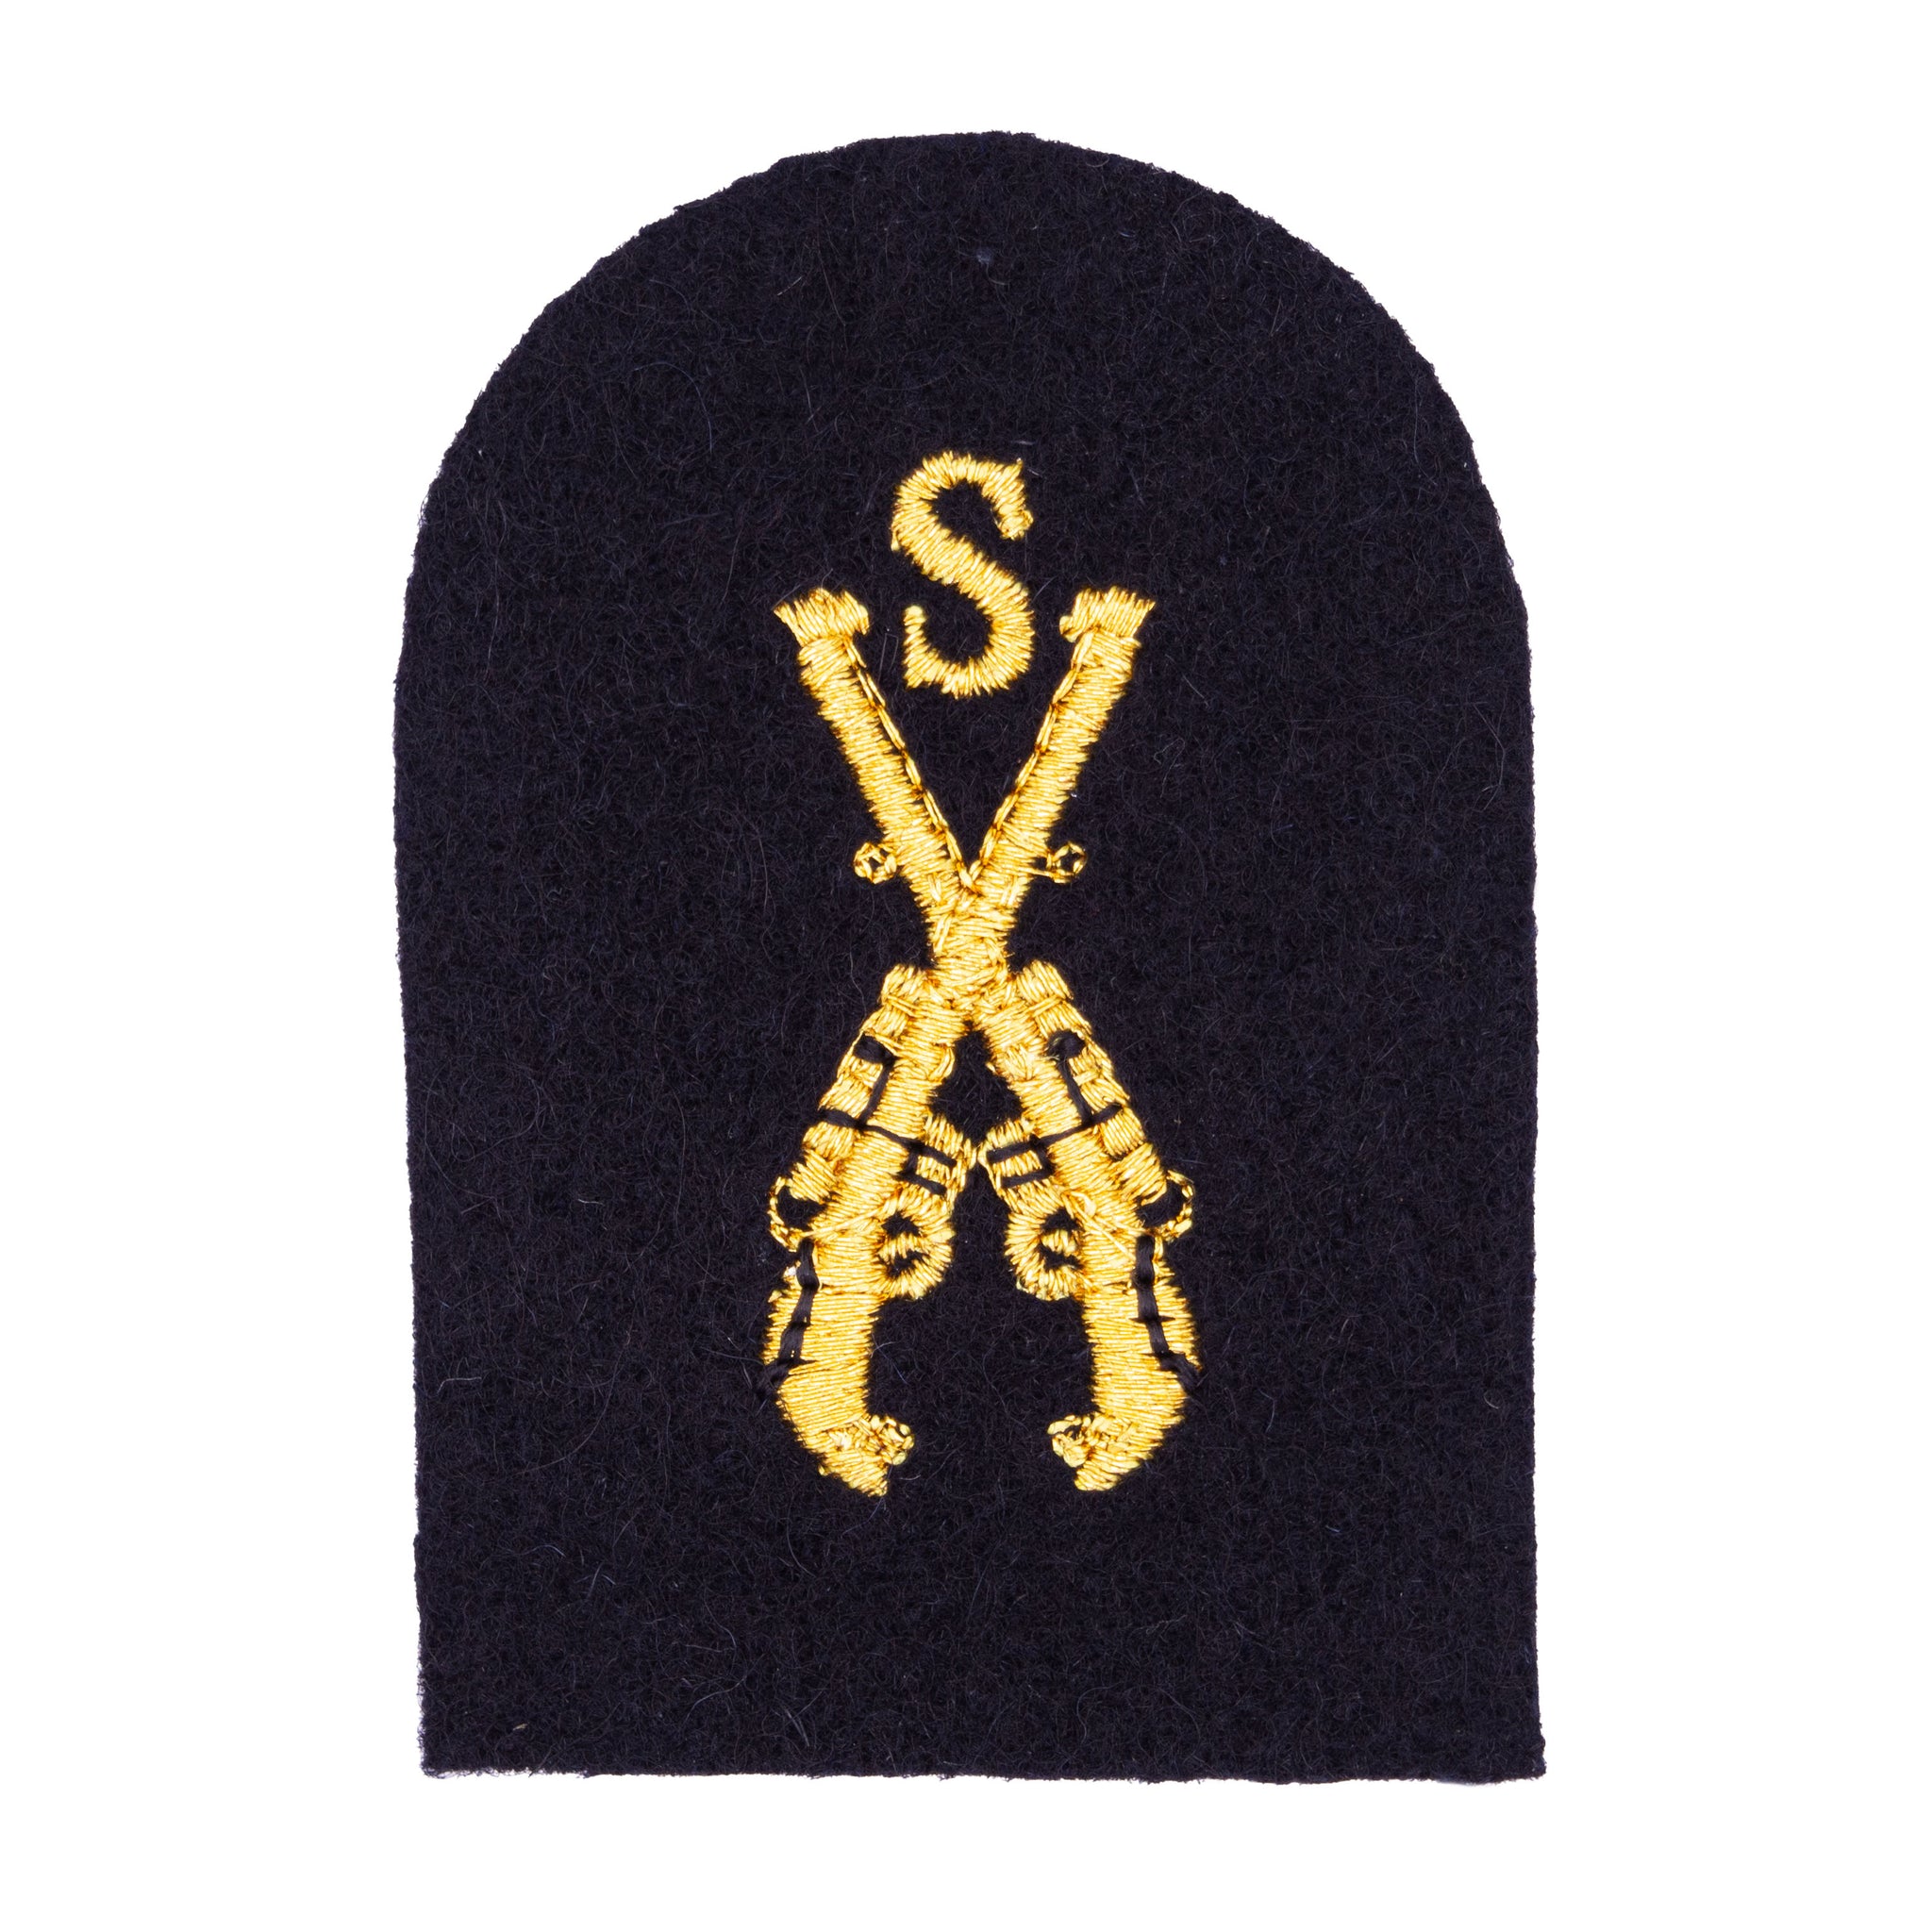 Snipers Crossed Rifles with Letter S Royal Marine Badge